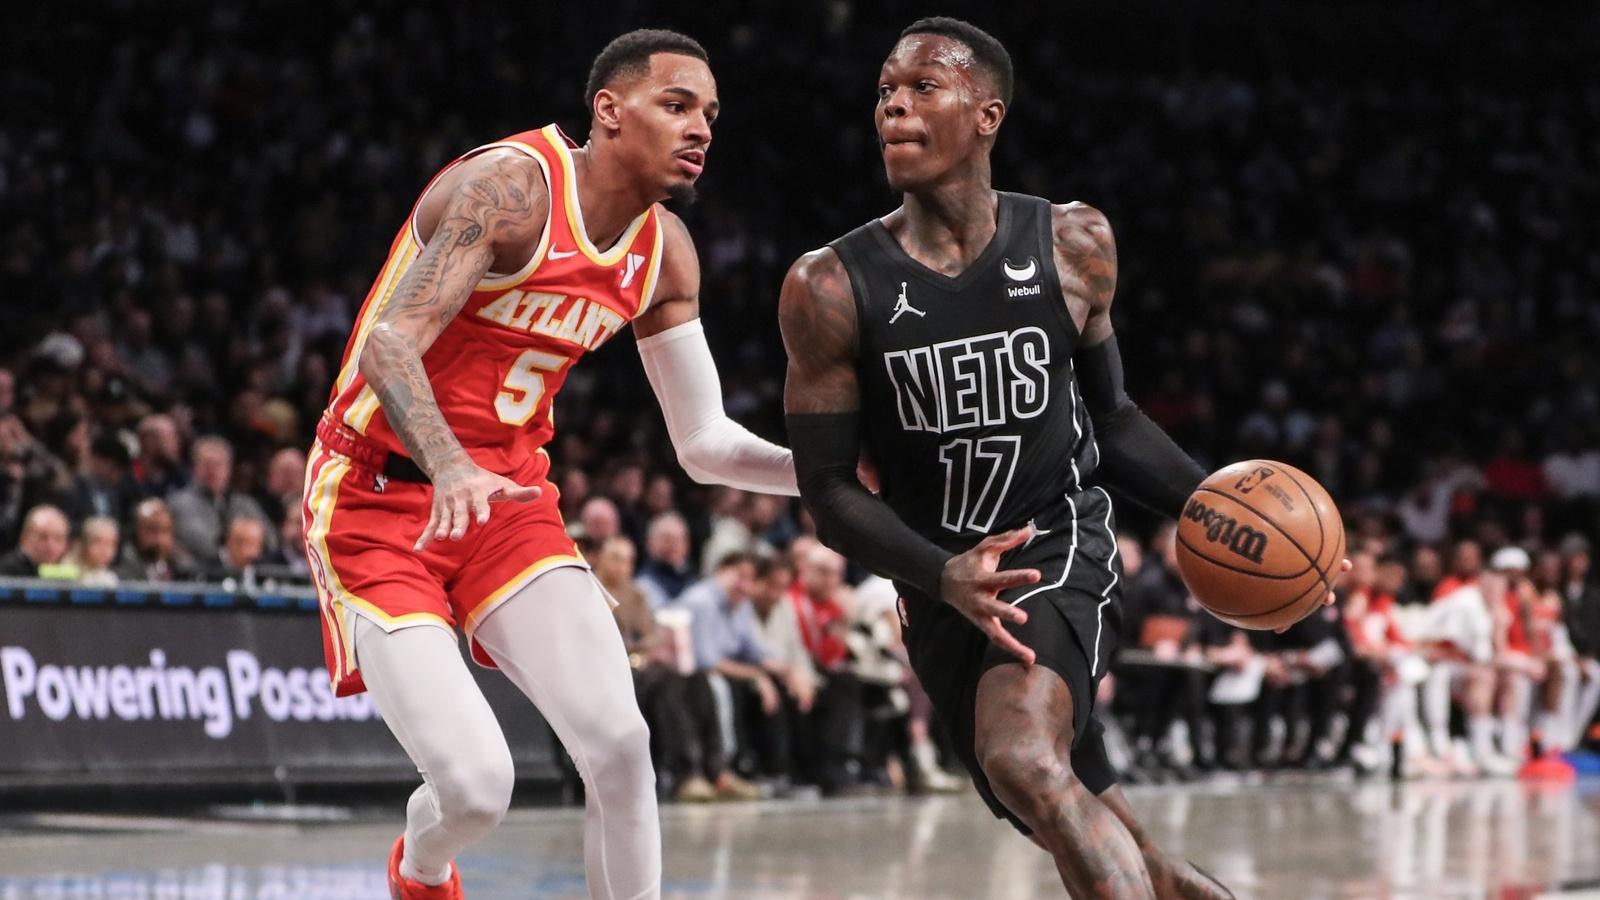 Brooklyn Nets guard Dennis Schroder (17) looks to drive past Atlanta Hawks guard Dejounte Murray (5) in the second quarter at Barclays Center. / Wendell Cruz-USA TODAY Sports